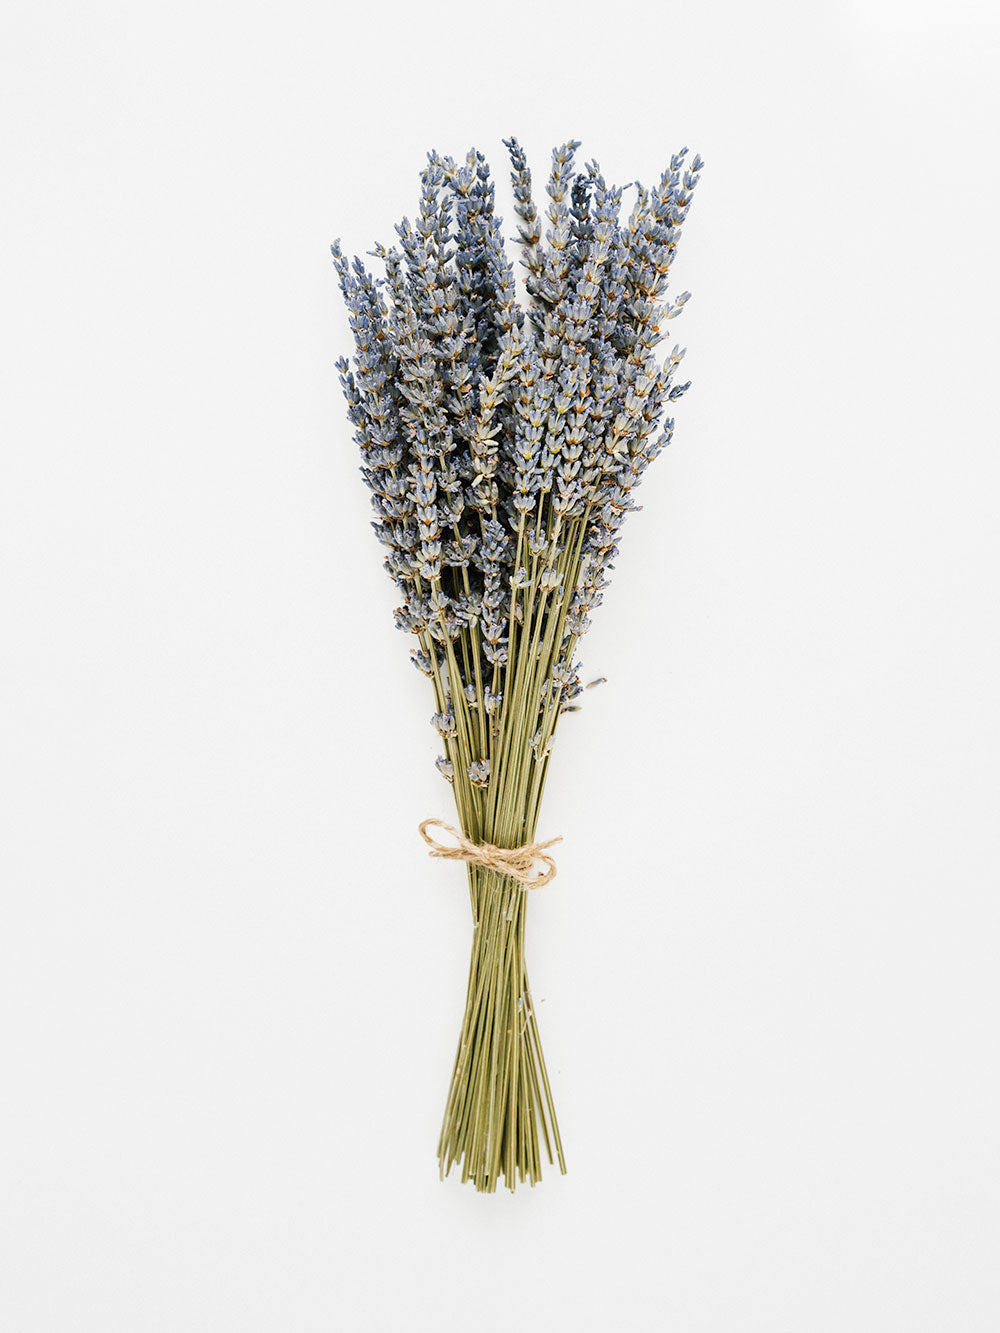 Dried lavender Bunches